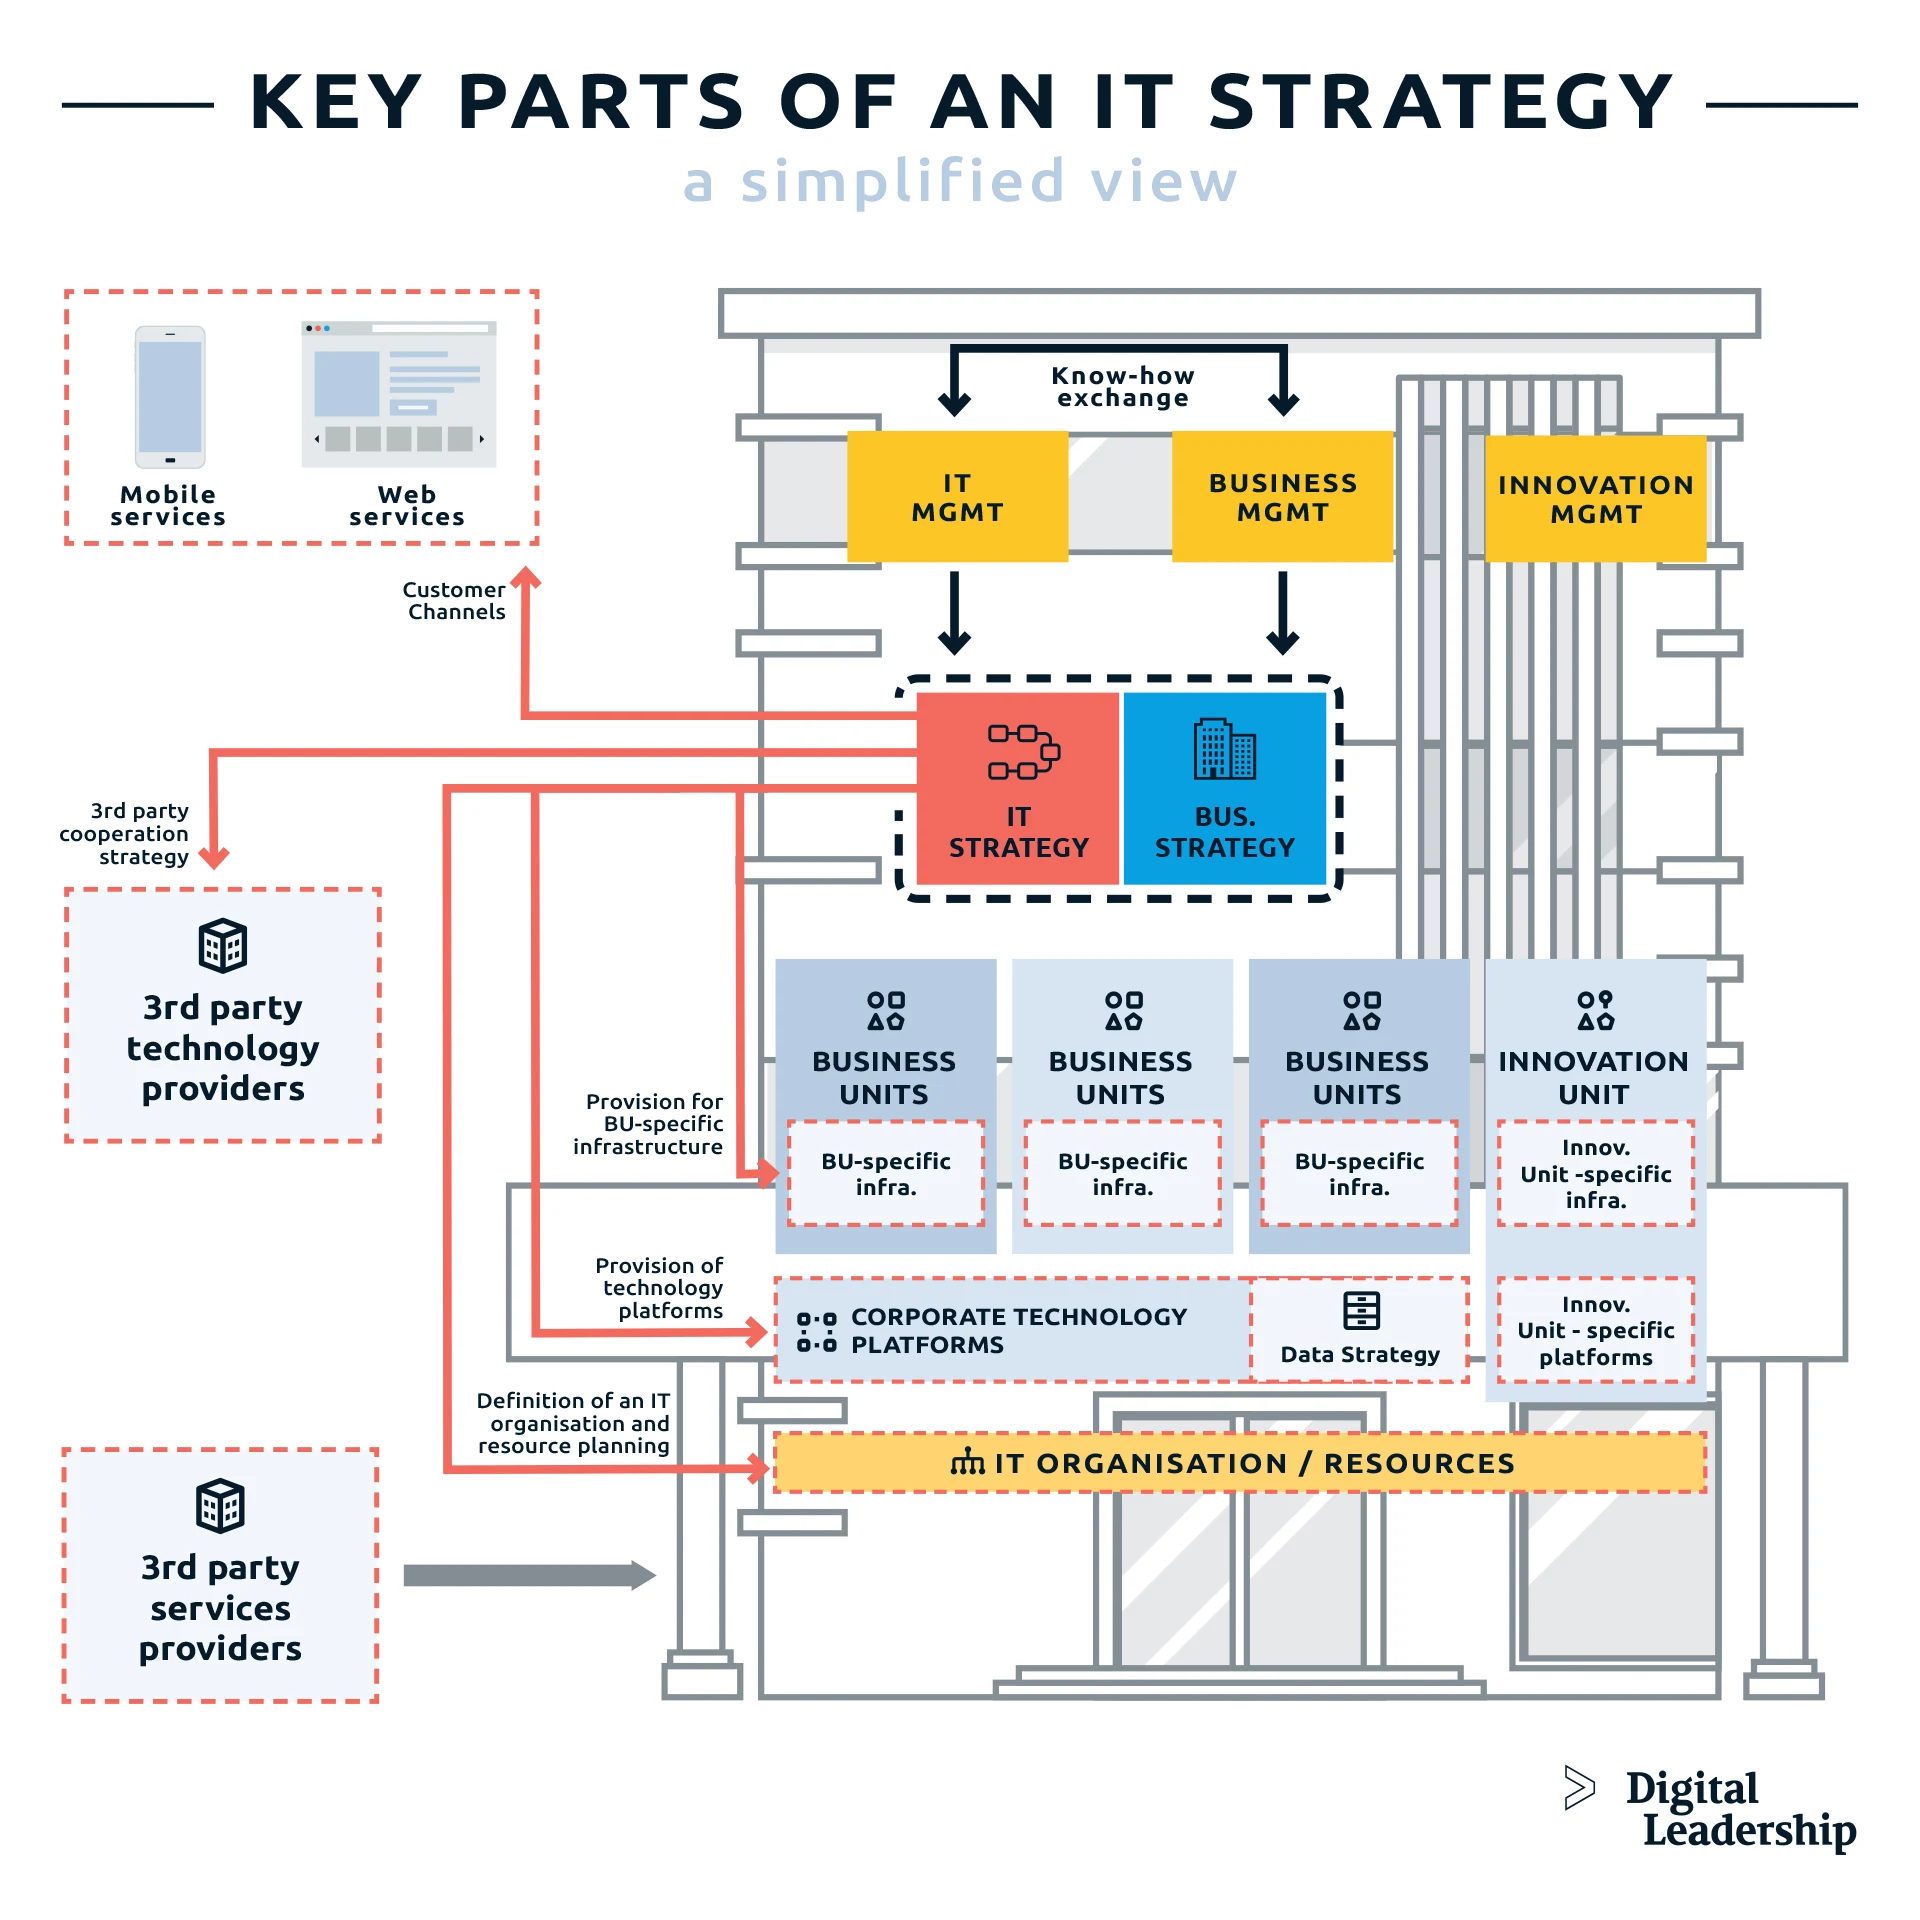 Key Parts of IT Strategy